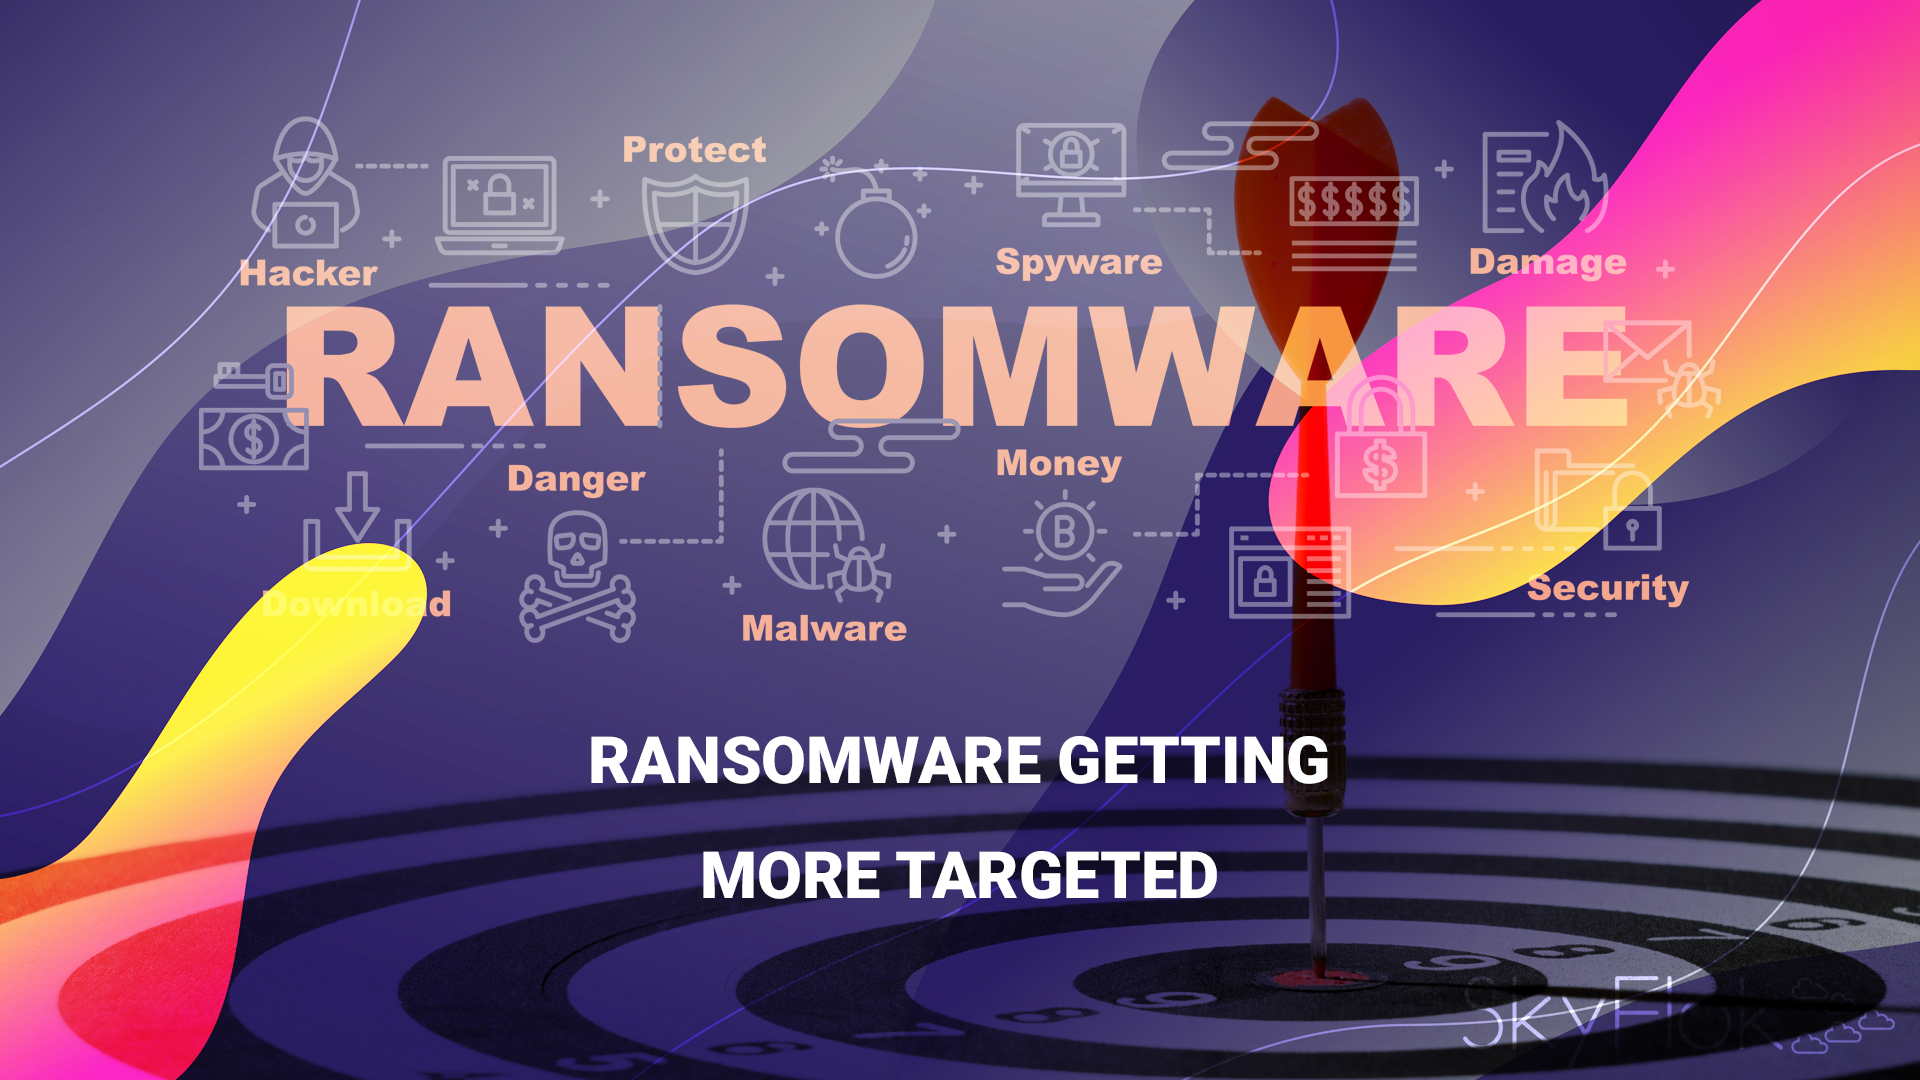 Ransomware getting more targeted